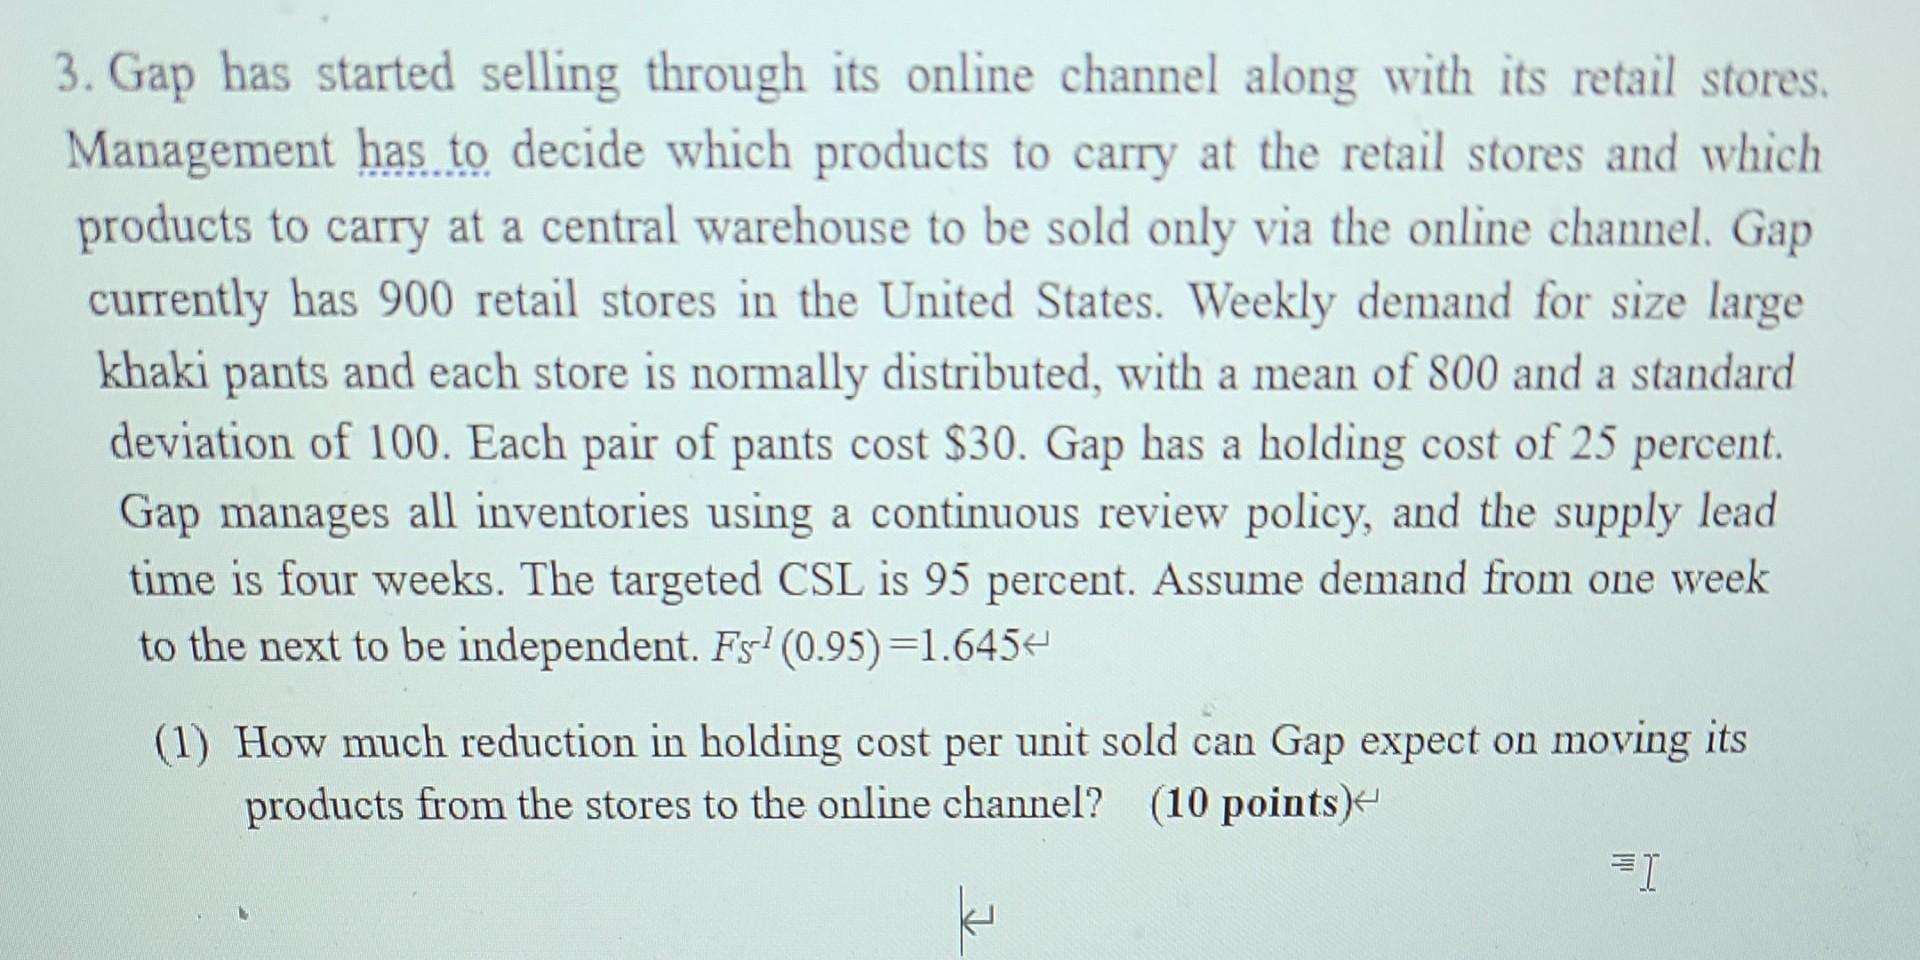 3. Gap has started selling through its online channel along with its retail stores,
Management has to decide which products t